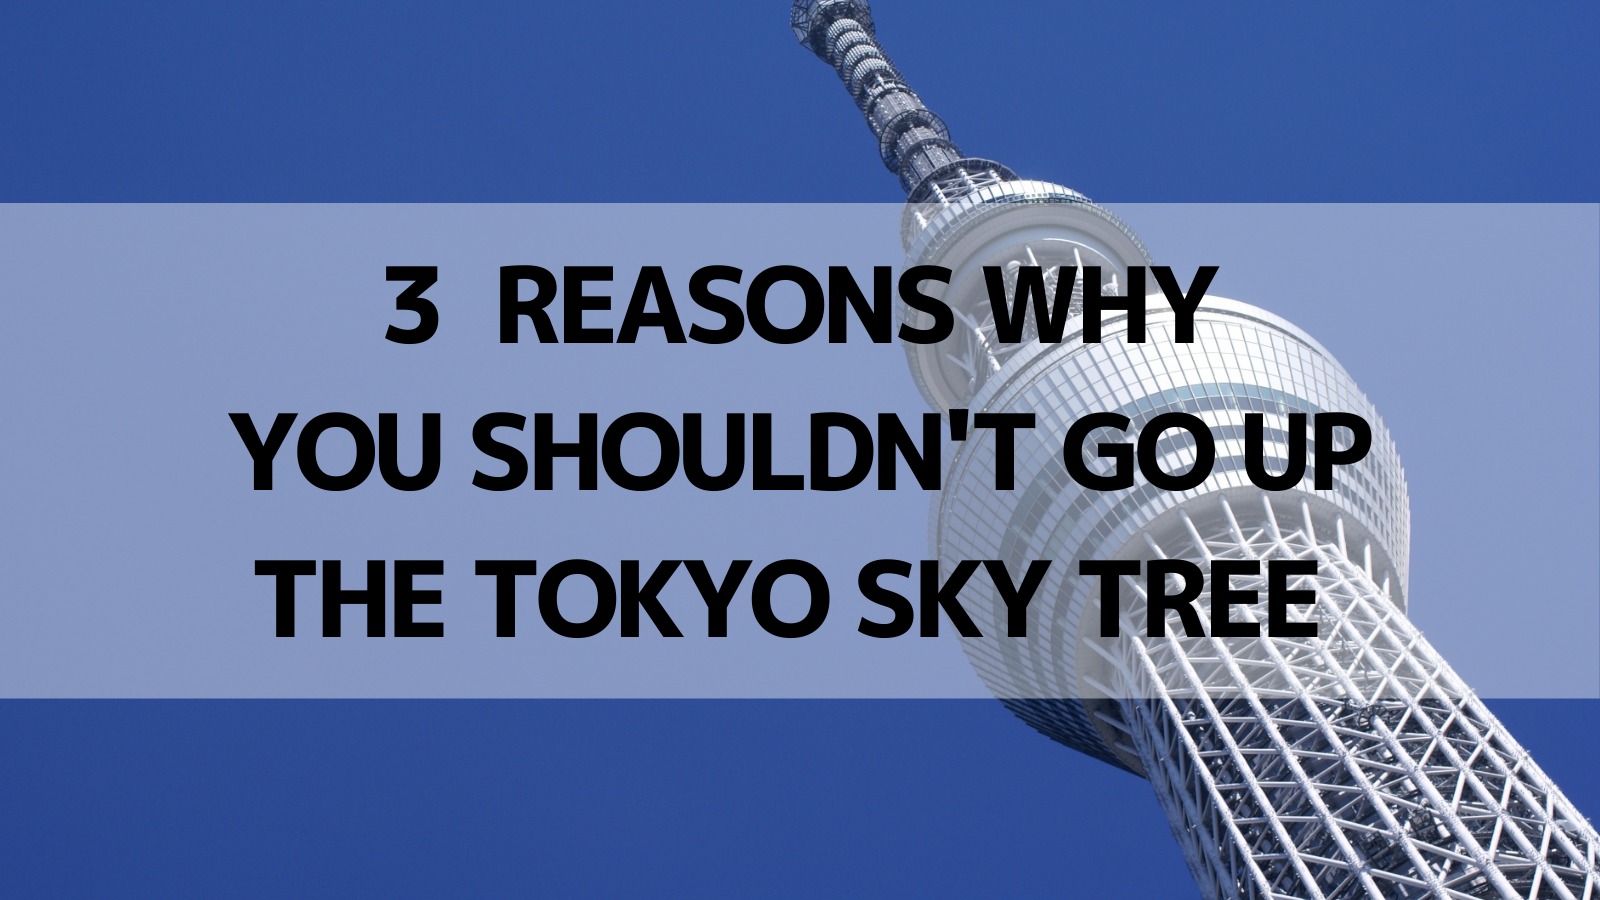 Time proven to tick faster on Tokyo Skytree than ground